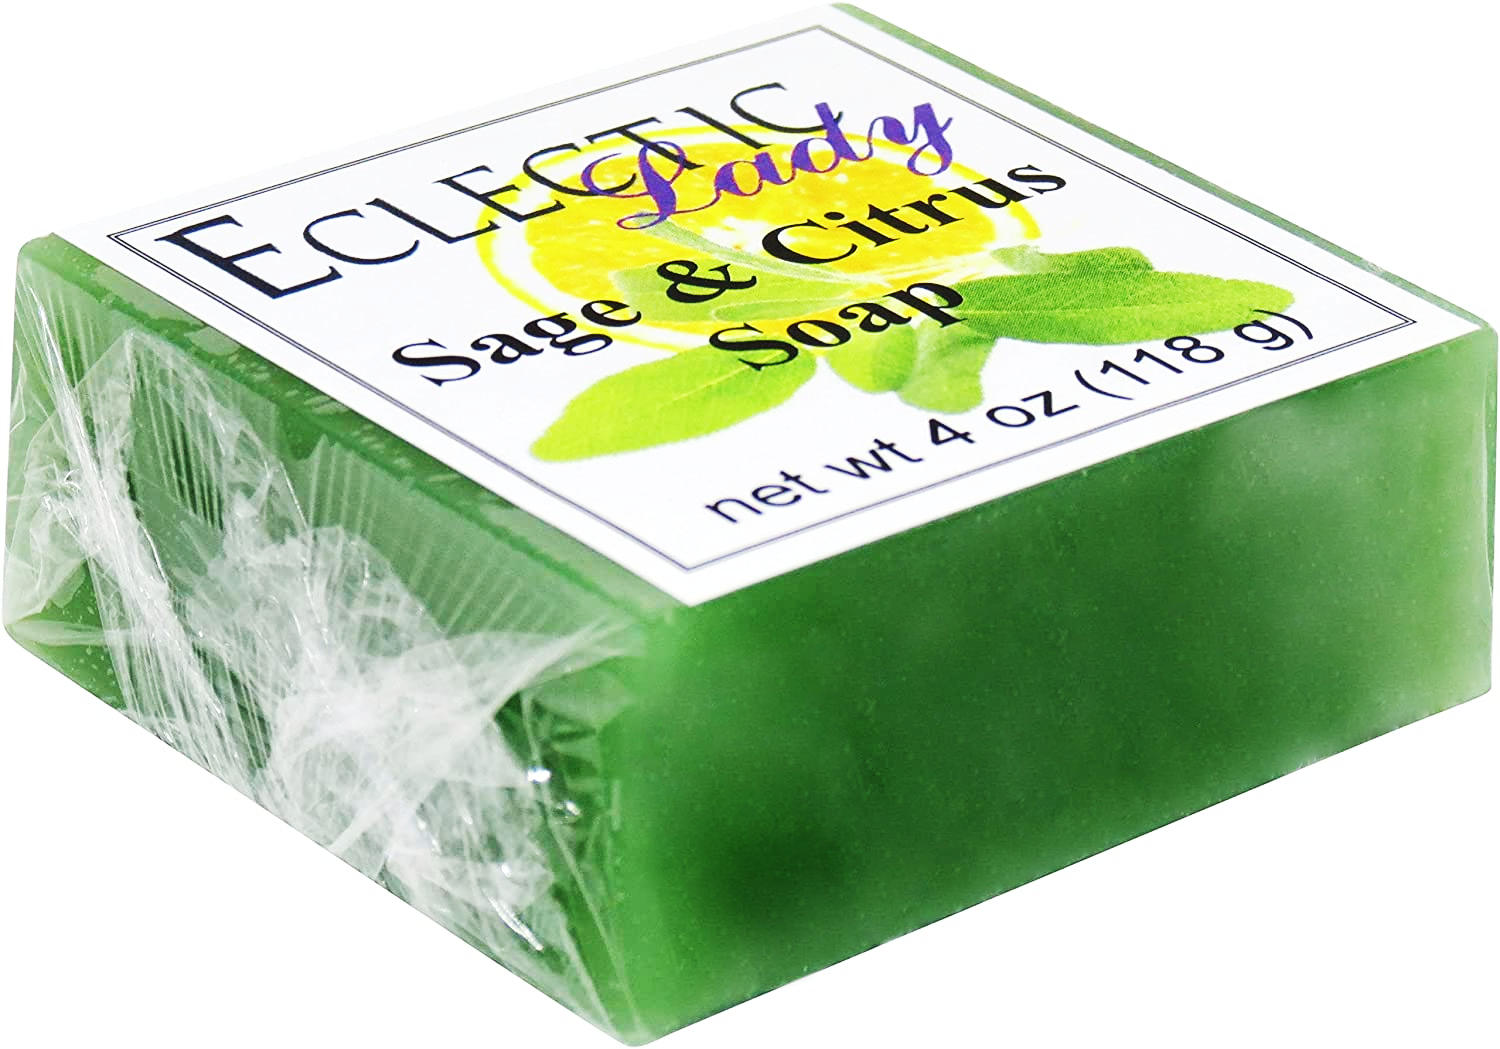 Eclectic Lady Sage And Citrus Glycerin Soap, Detergent Free and Hypo-Allergenic - 4 Oz (118g)